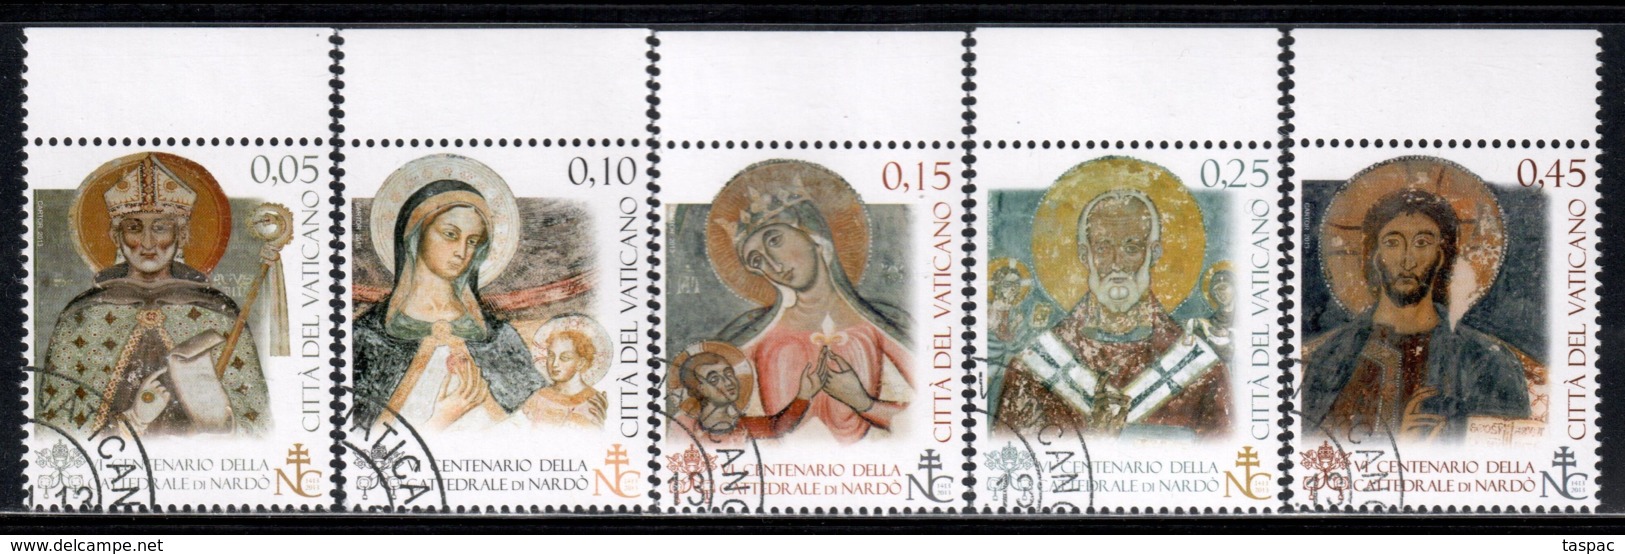 Vatican 2013 Mi# 1784-1788 Used - 7th Cent. Of The Cathedral Of Santa Maria Di Nardo - Used Stamps